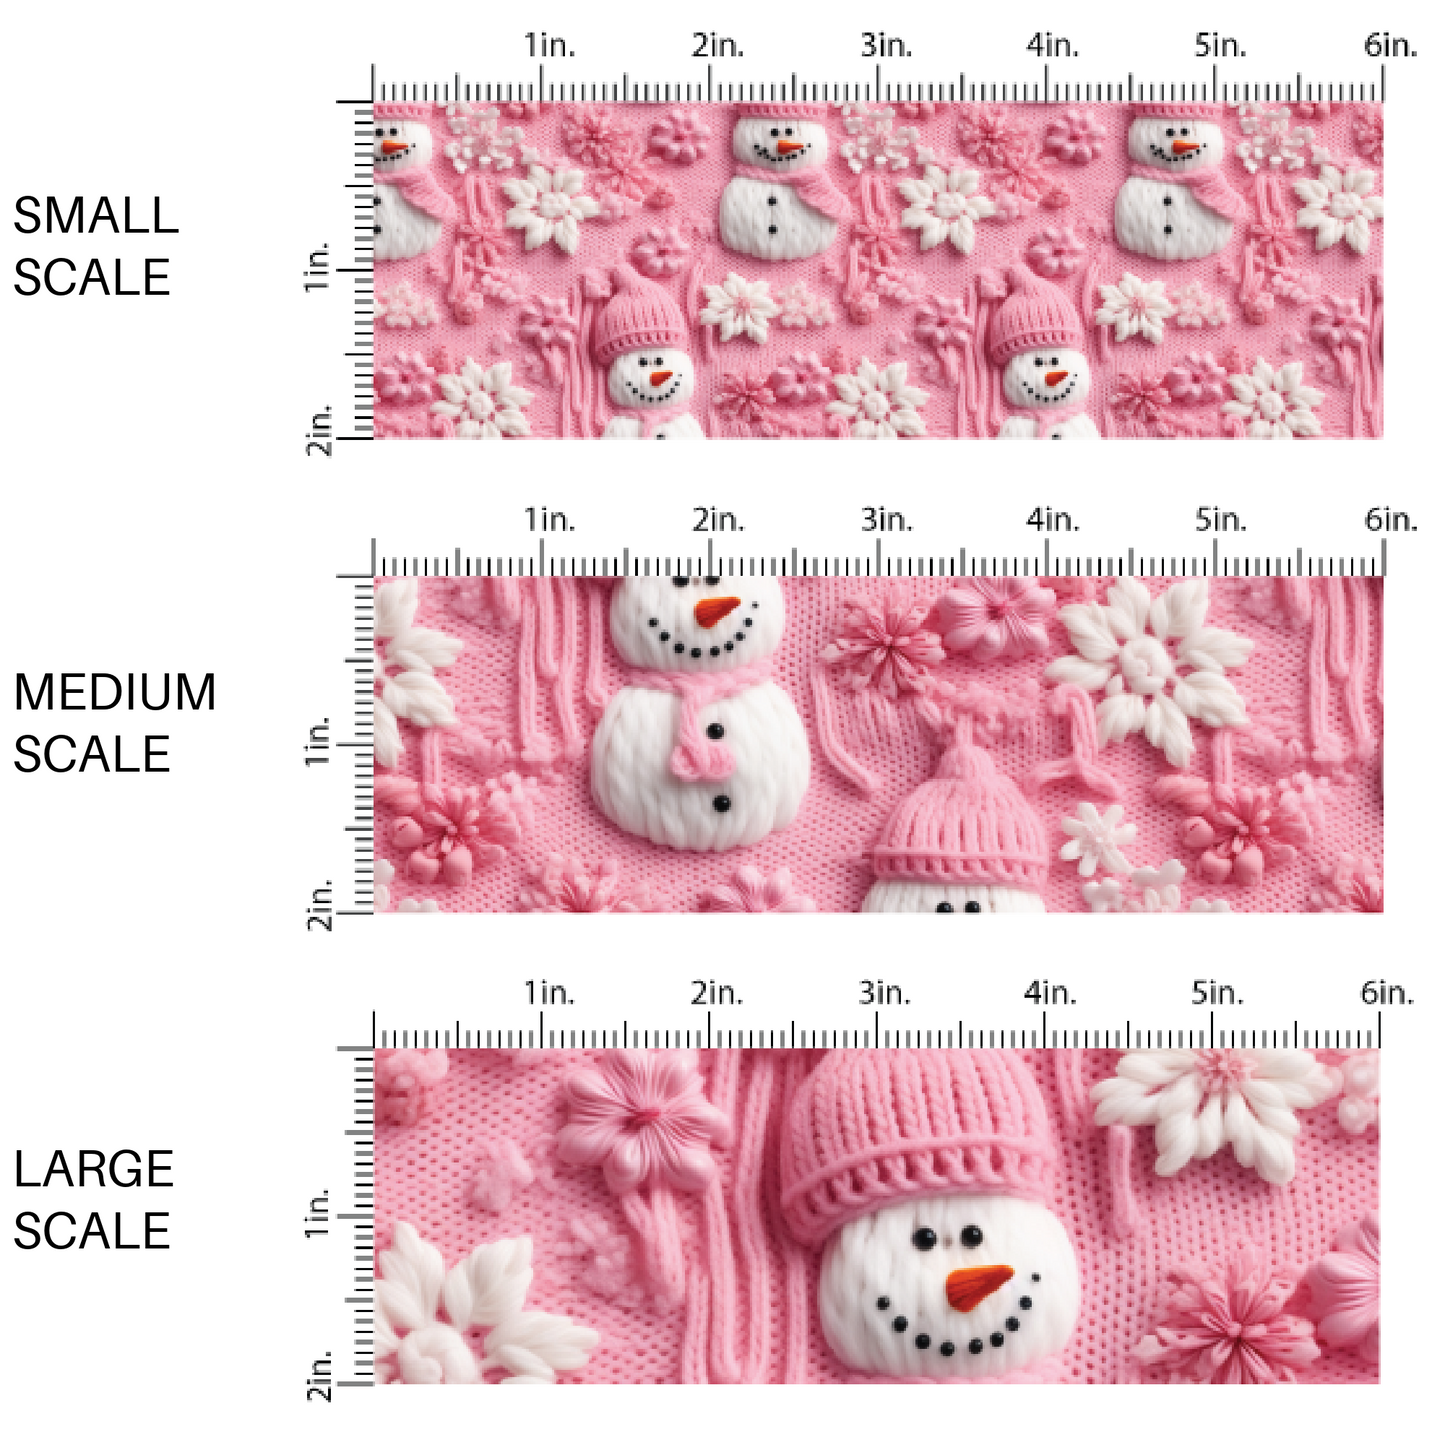 This scale chart of small scale, medium scale, and large scale of these holiday sewn pattern themed fabric by the yard features pink and white snowflakes on pink. This fun Christmas fabric can be used for all your sewing and crafting needs!